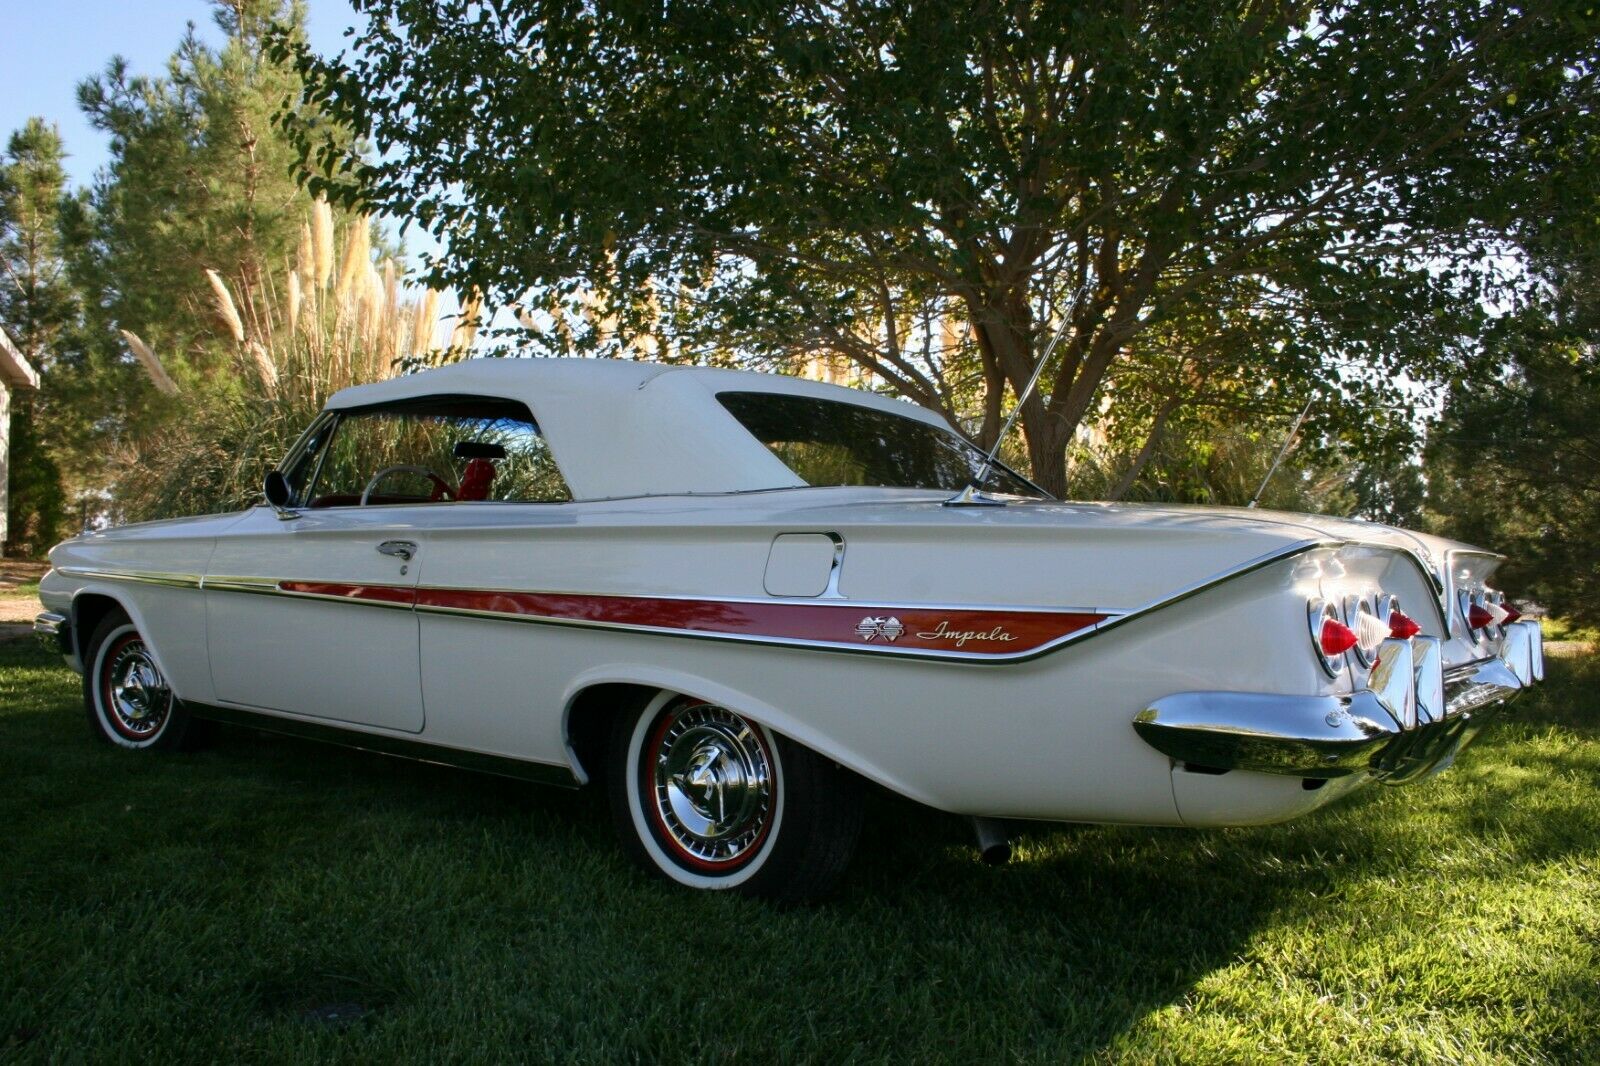 World, Meet This Rare 1961 Impala SS, an Amazing Time Capsule With Everything  Original - autoevolution